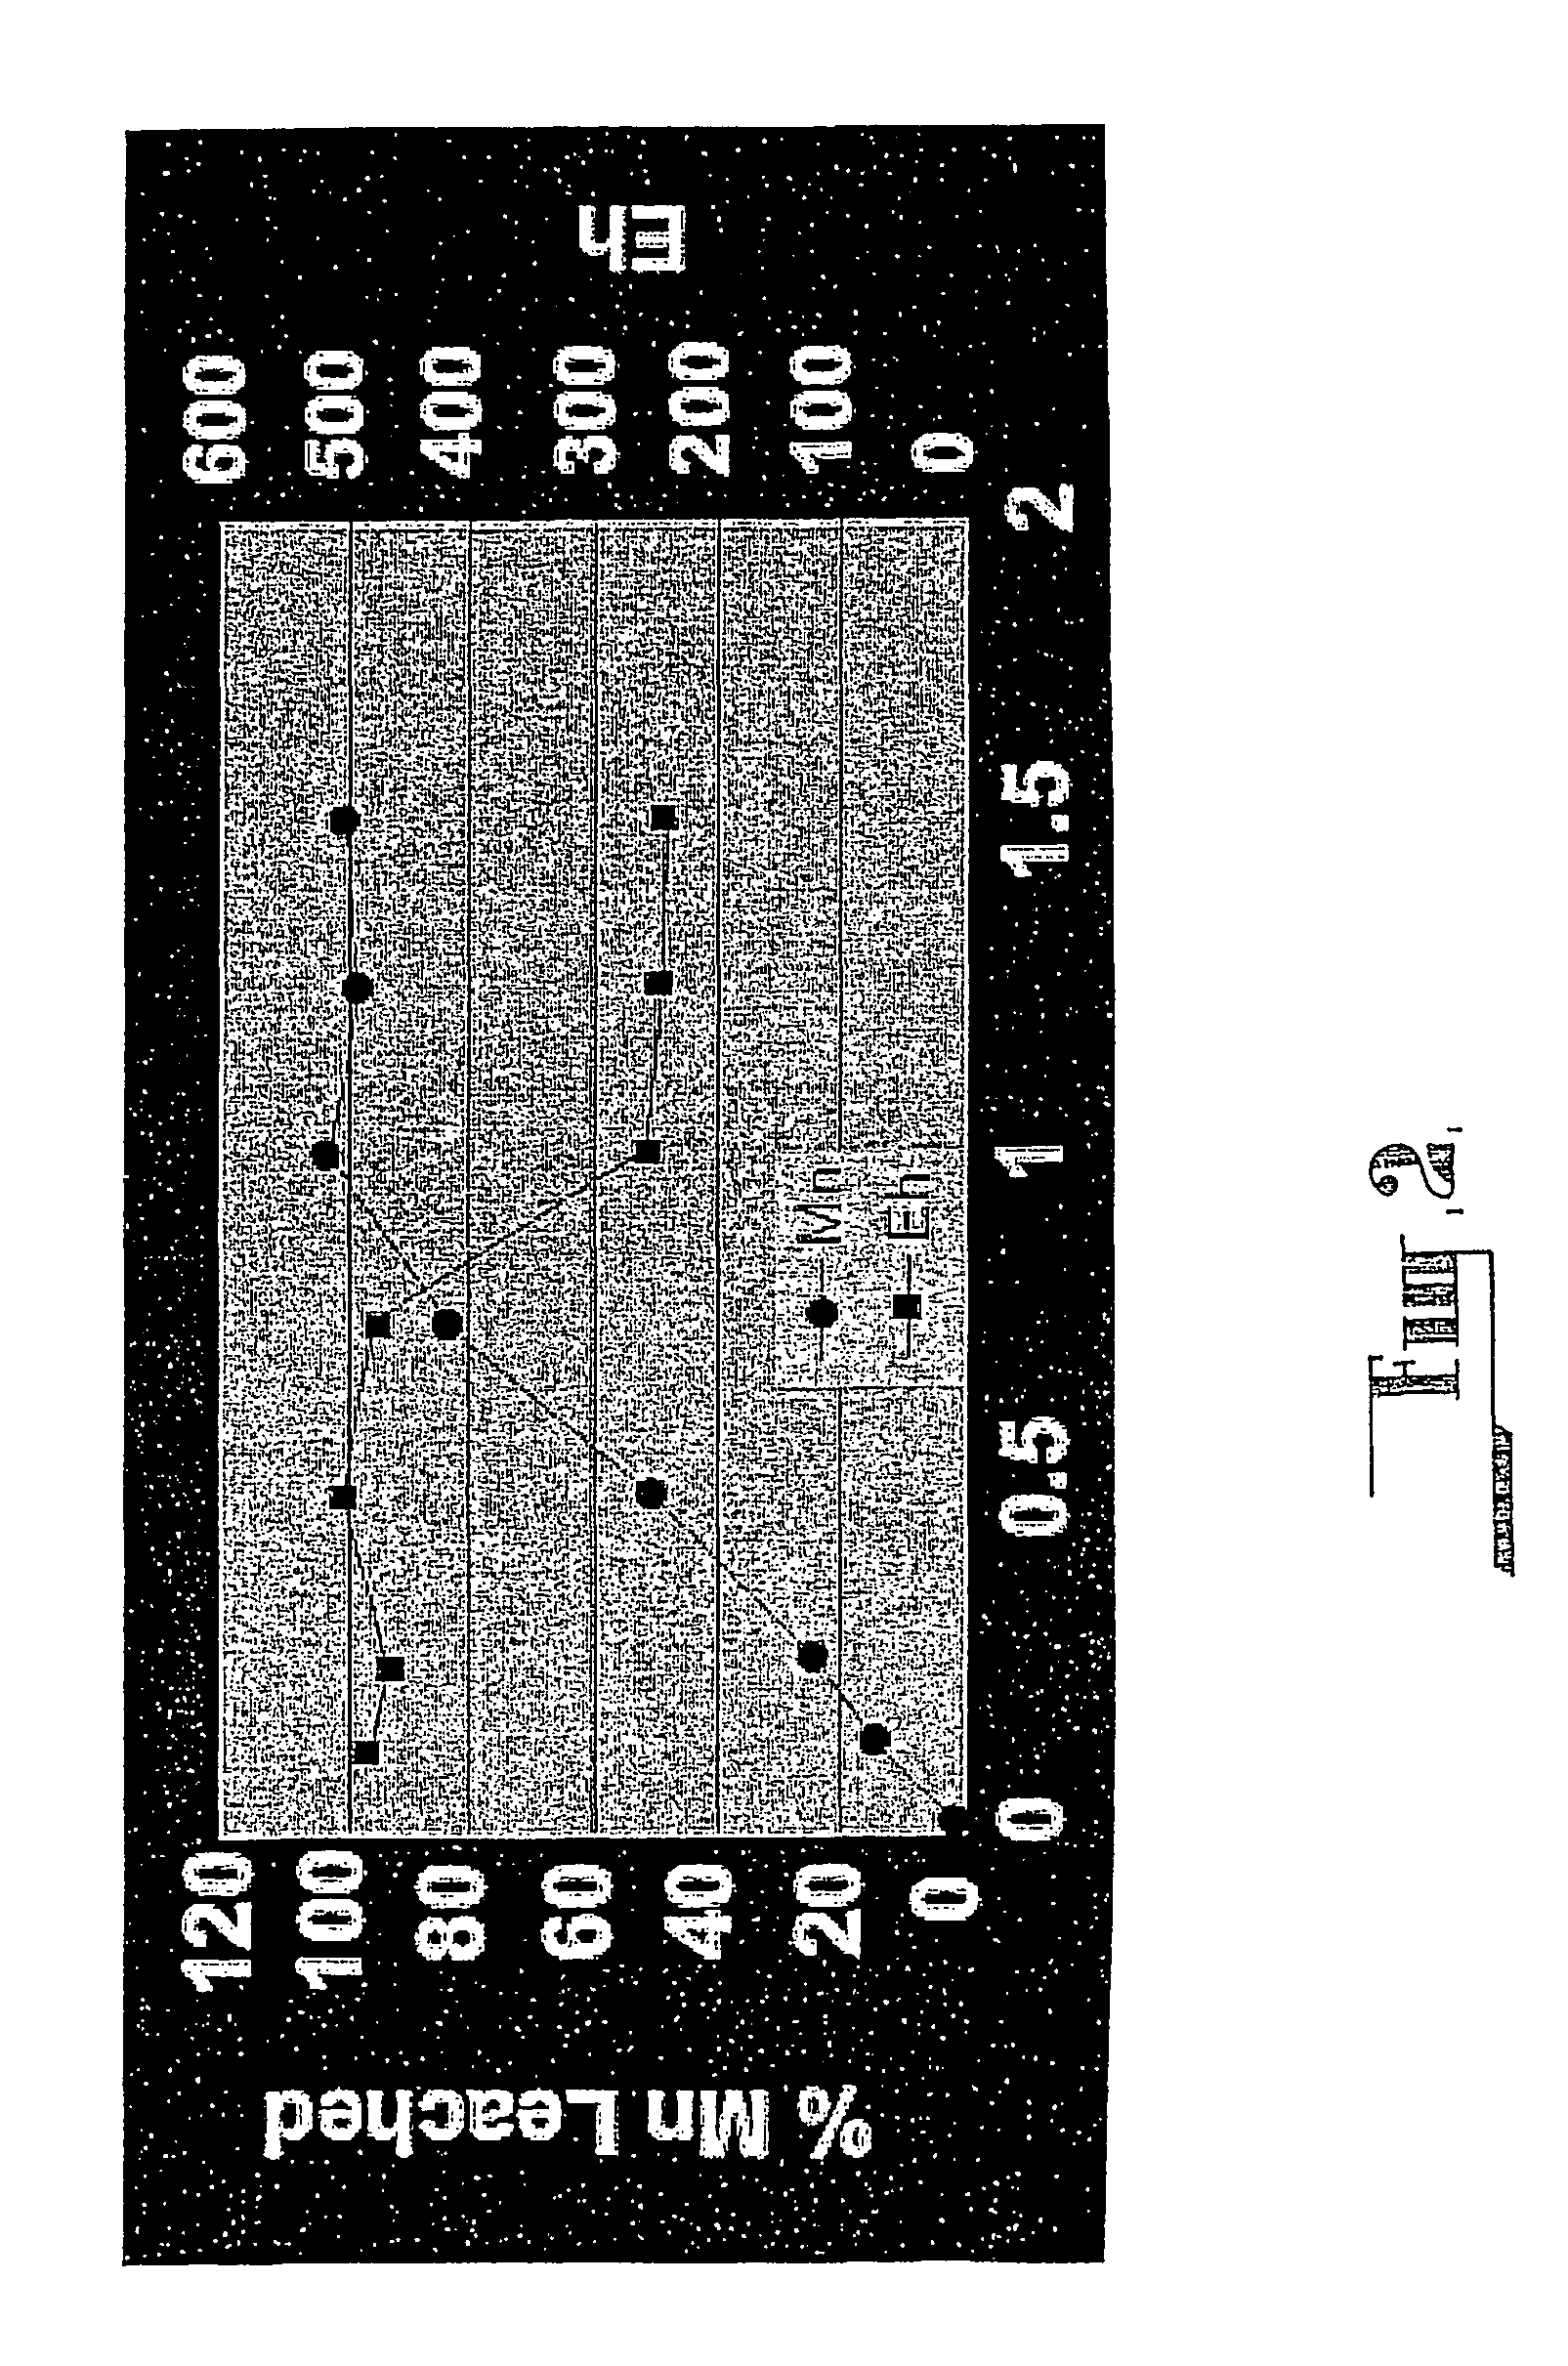 Hydrometallurgical processing of manganese containing materials